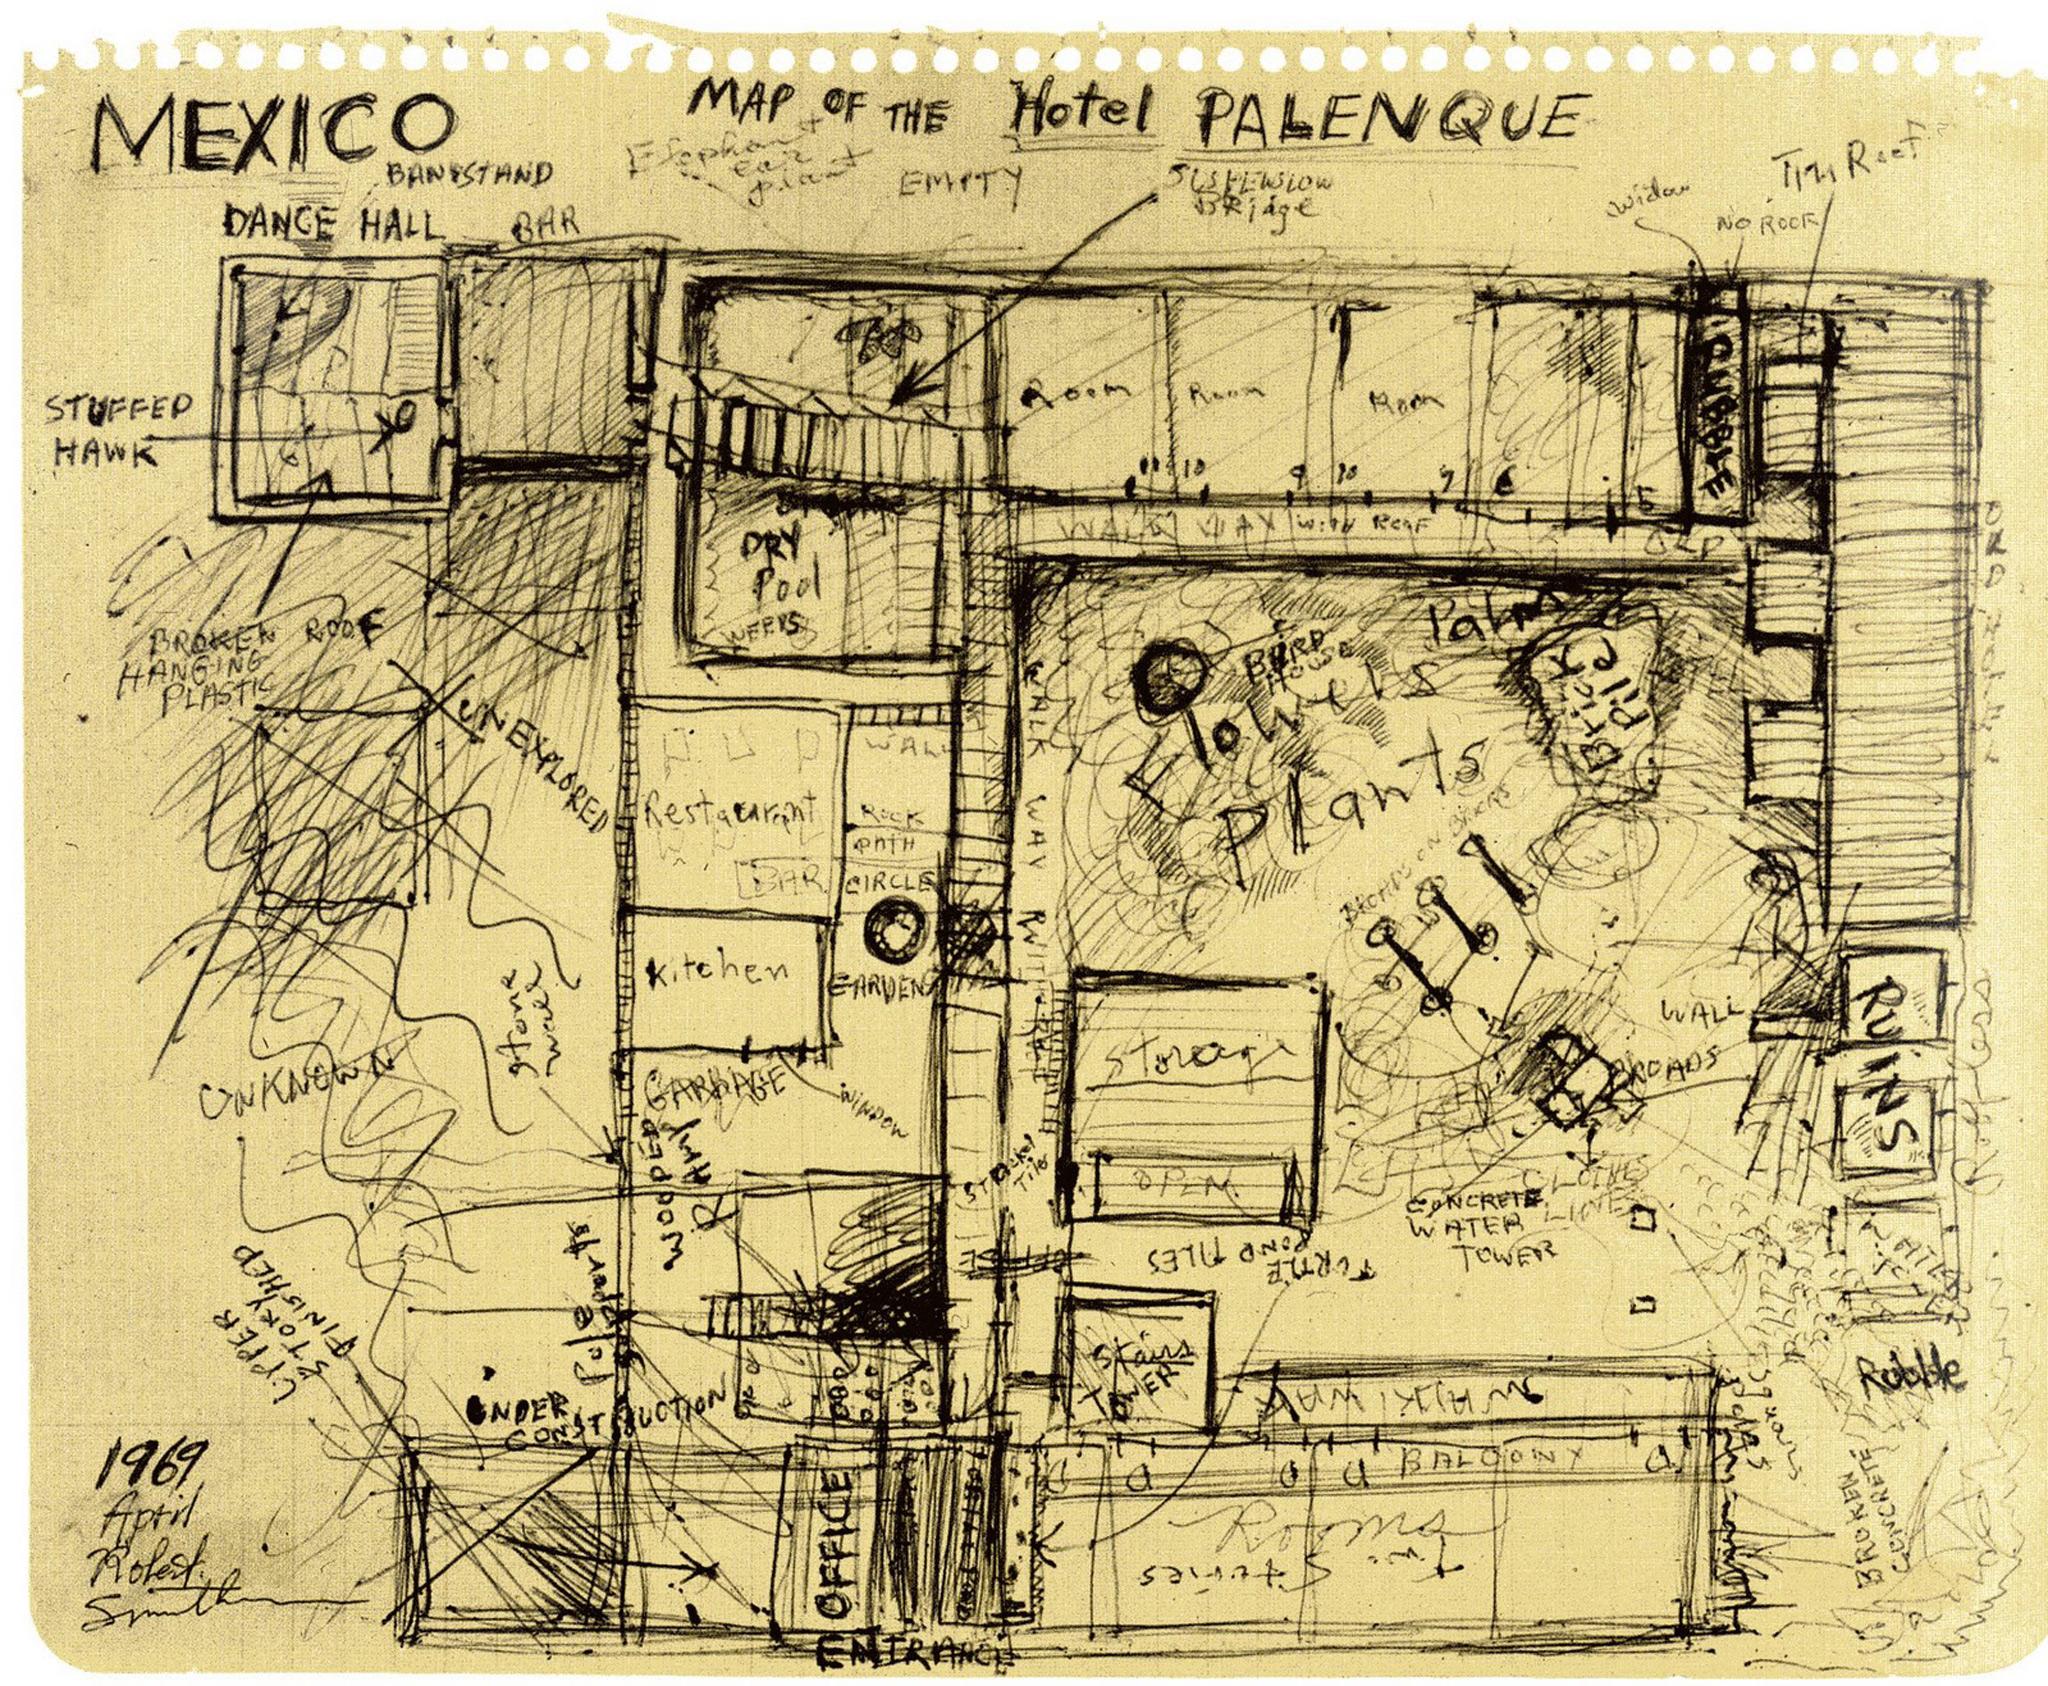 hand-drawn map of a hotel in Palenque, Mexico